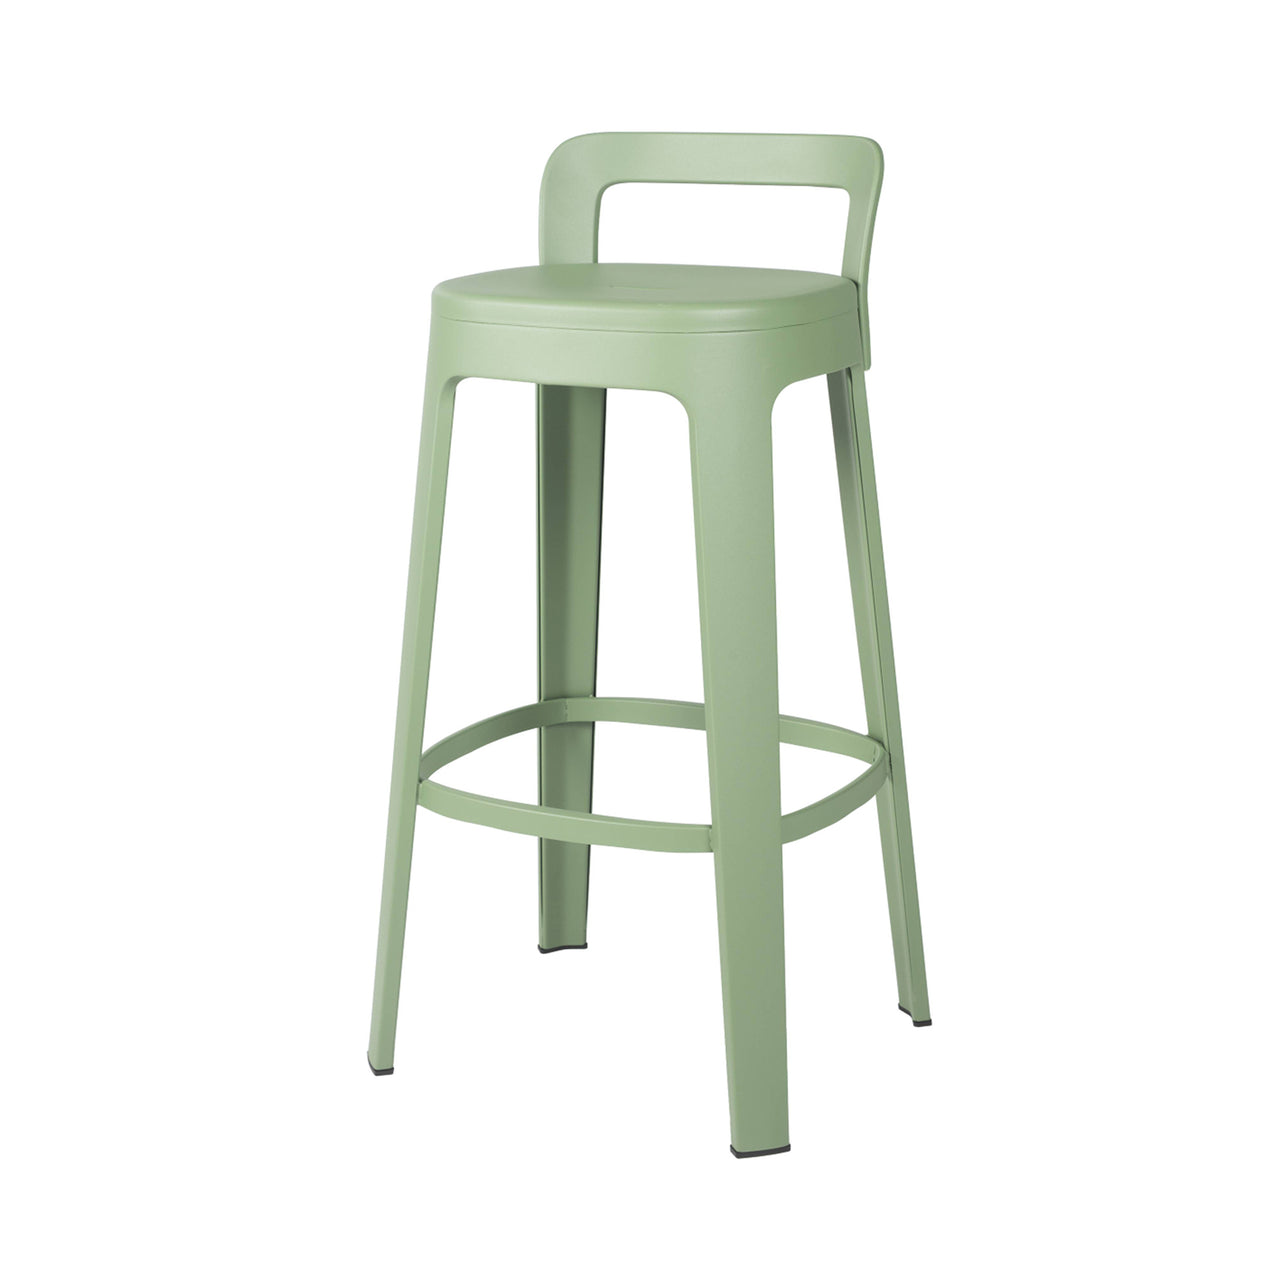 Ombra Bar + Counter Stool with Backrest: Bar + Green